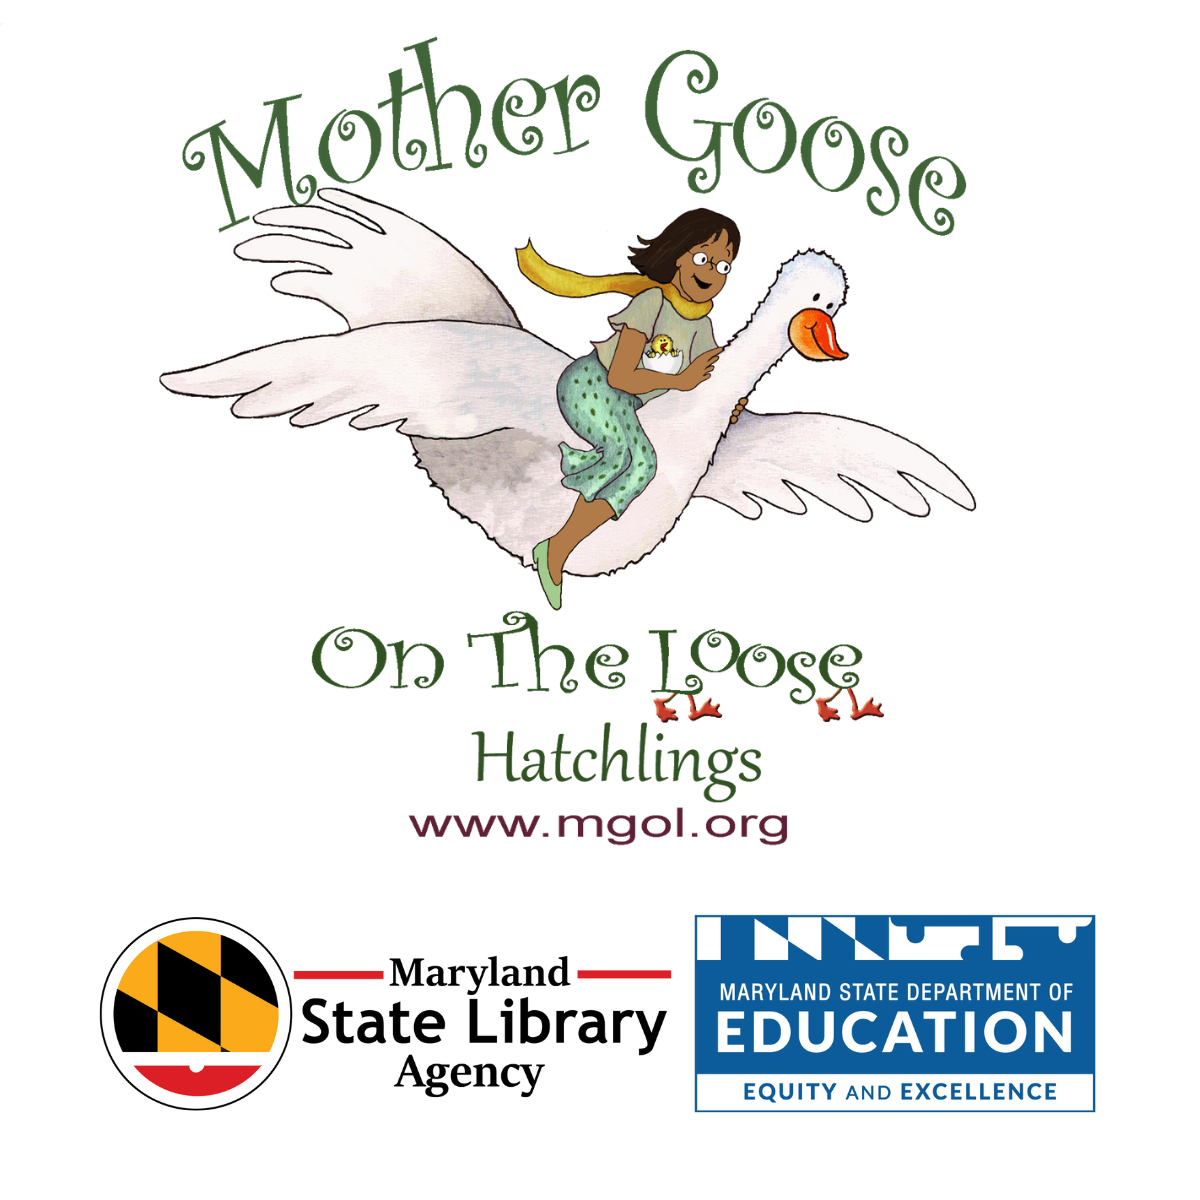 Website for Mother Goose on the Loose: Hatchlings at www.mgol.org and logo featuring a woman riding a goose; Maryland State Library logo; Maryland State Department of Education logo